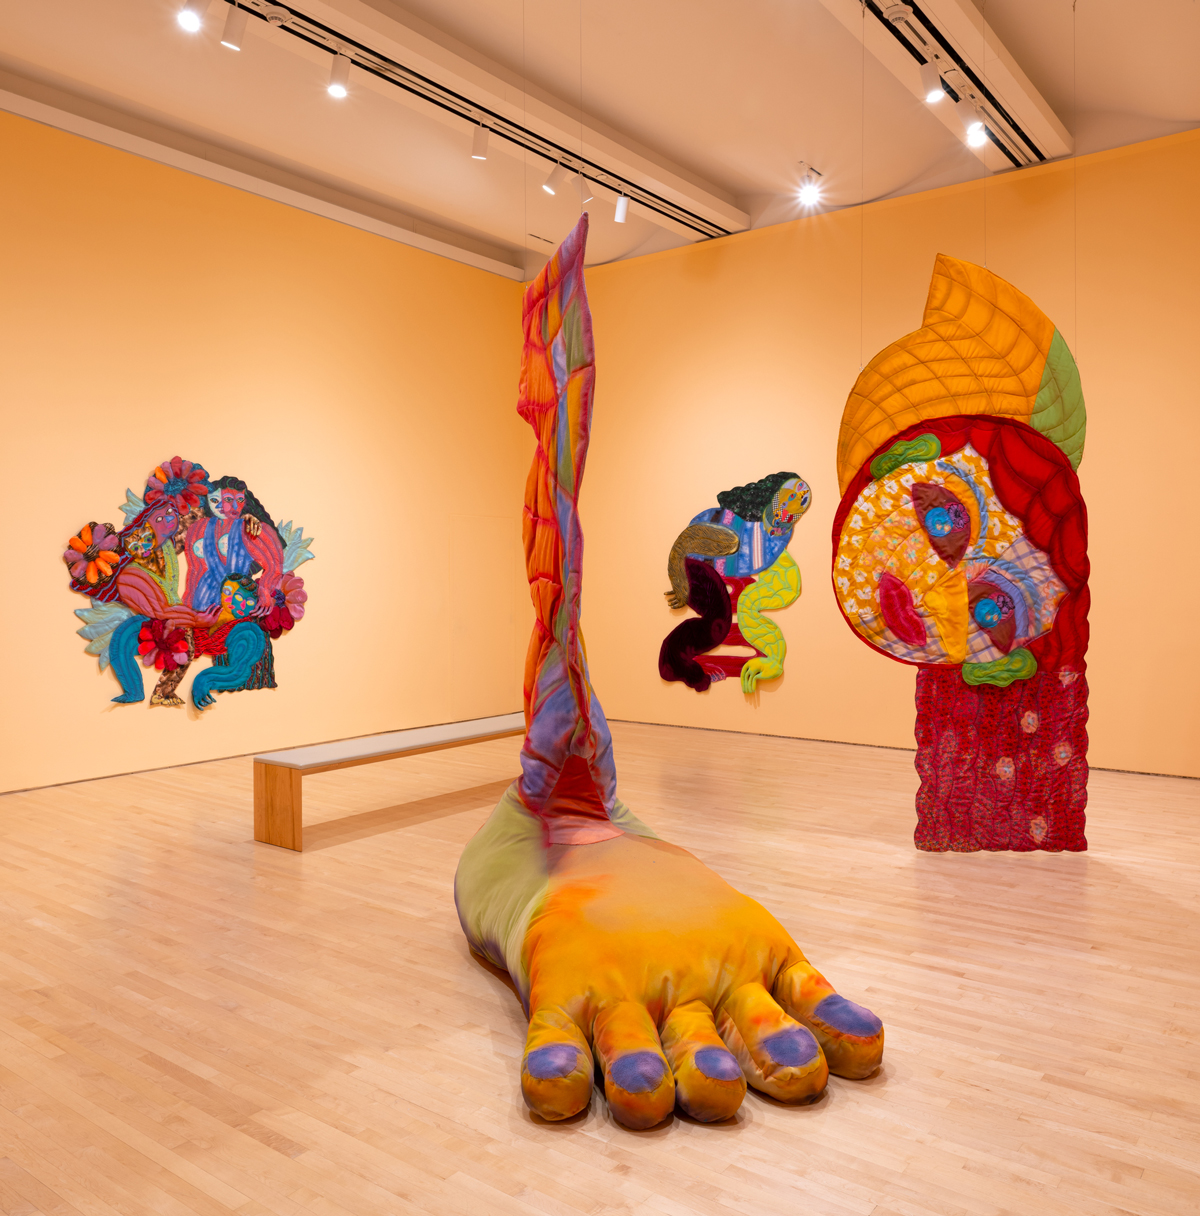 Light peach walls and arrangement of large multicolored textile works with giant foot and smiling head